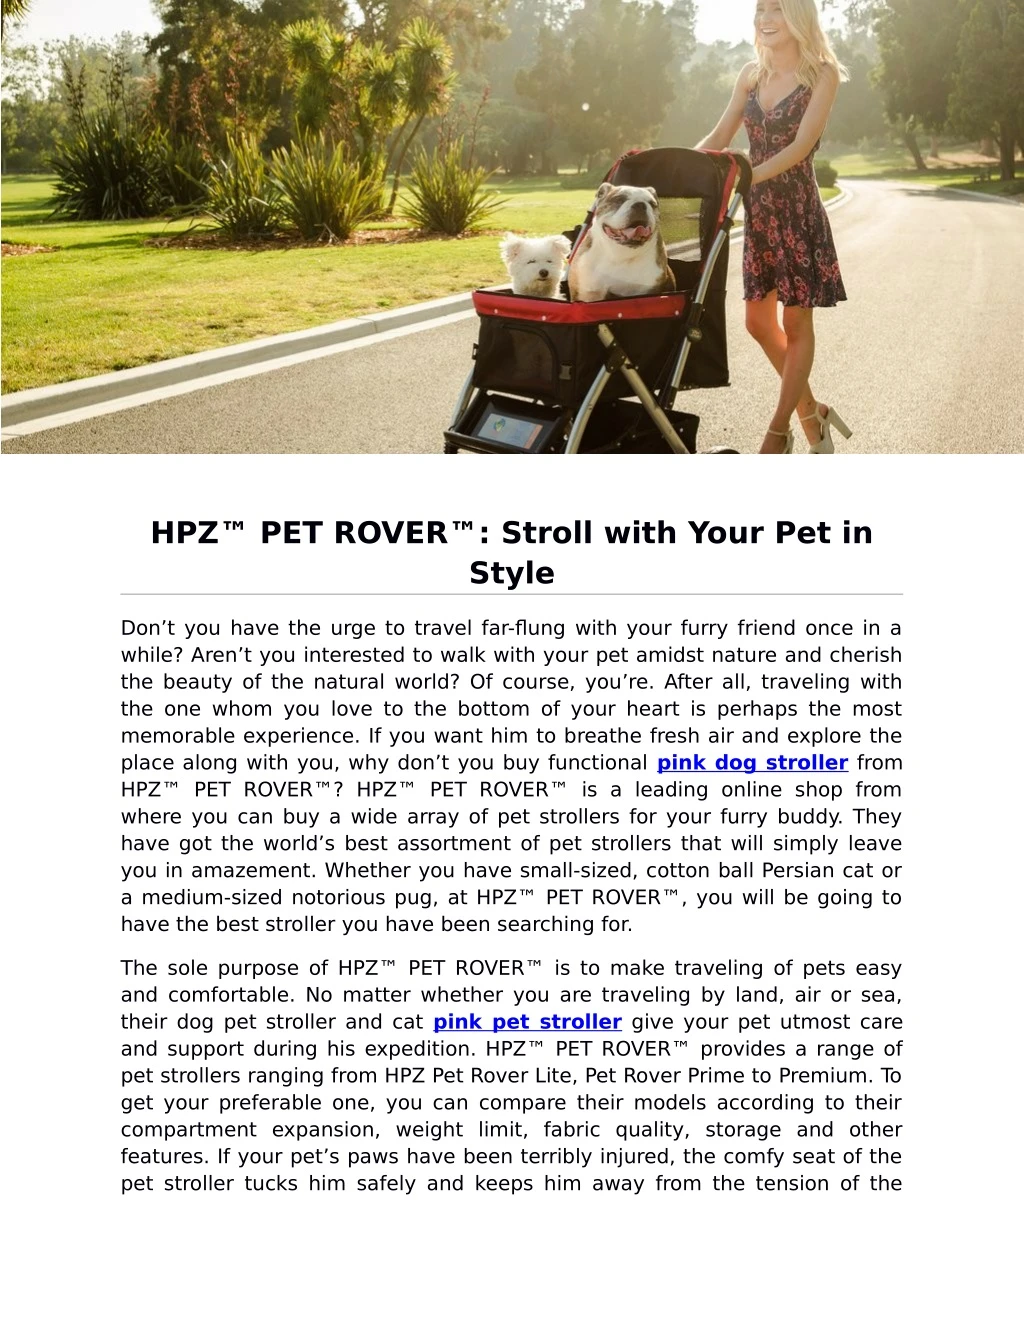 hpz pet rover stroll with your pet in style